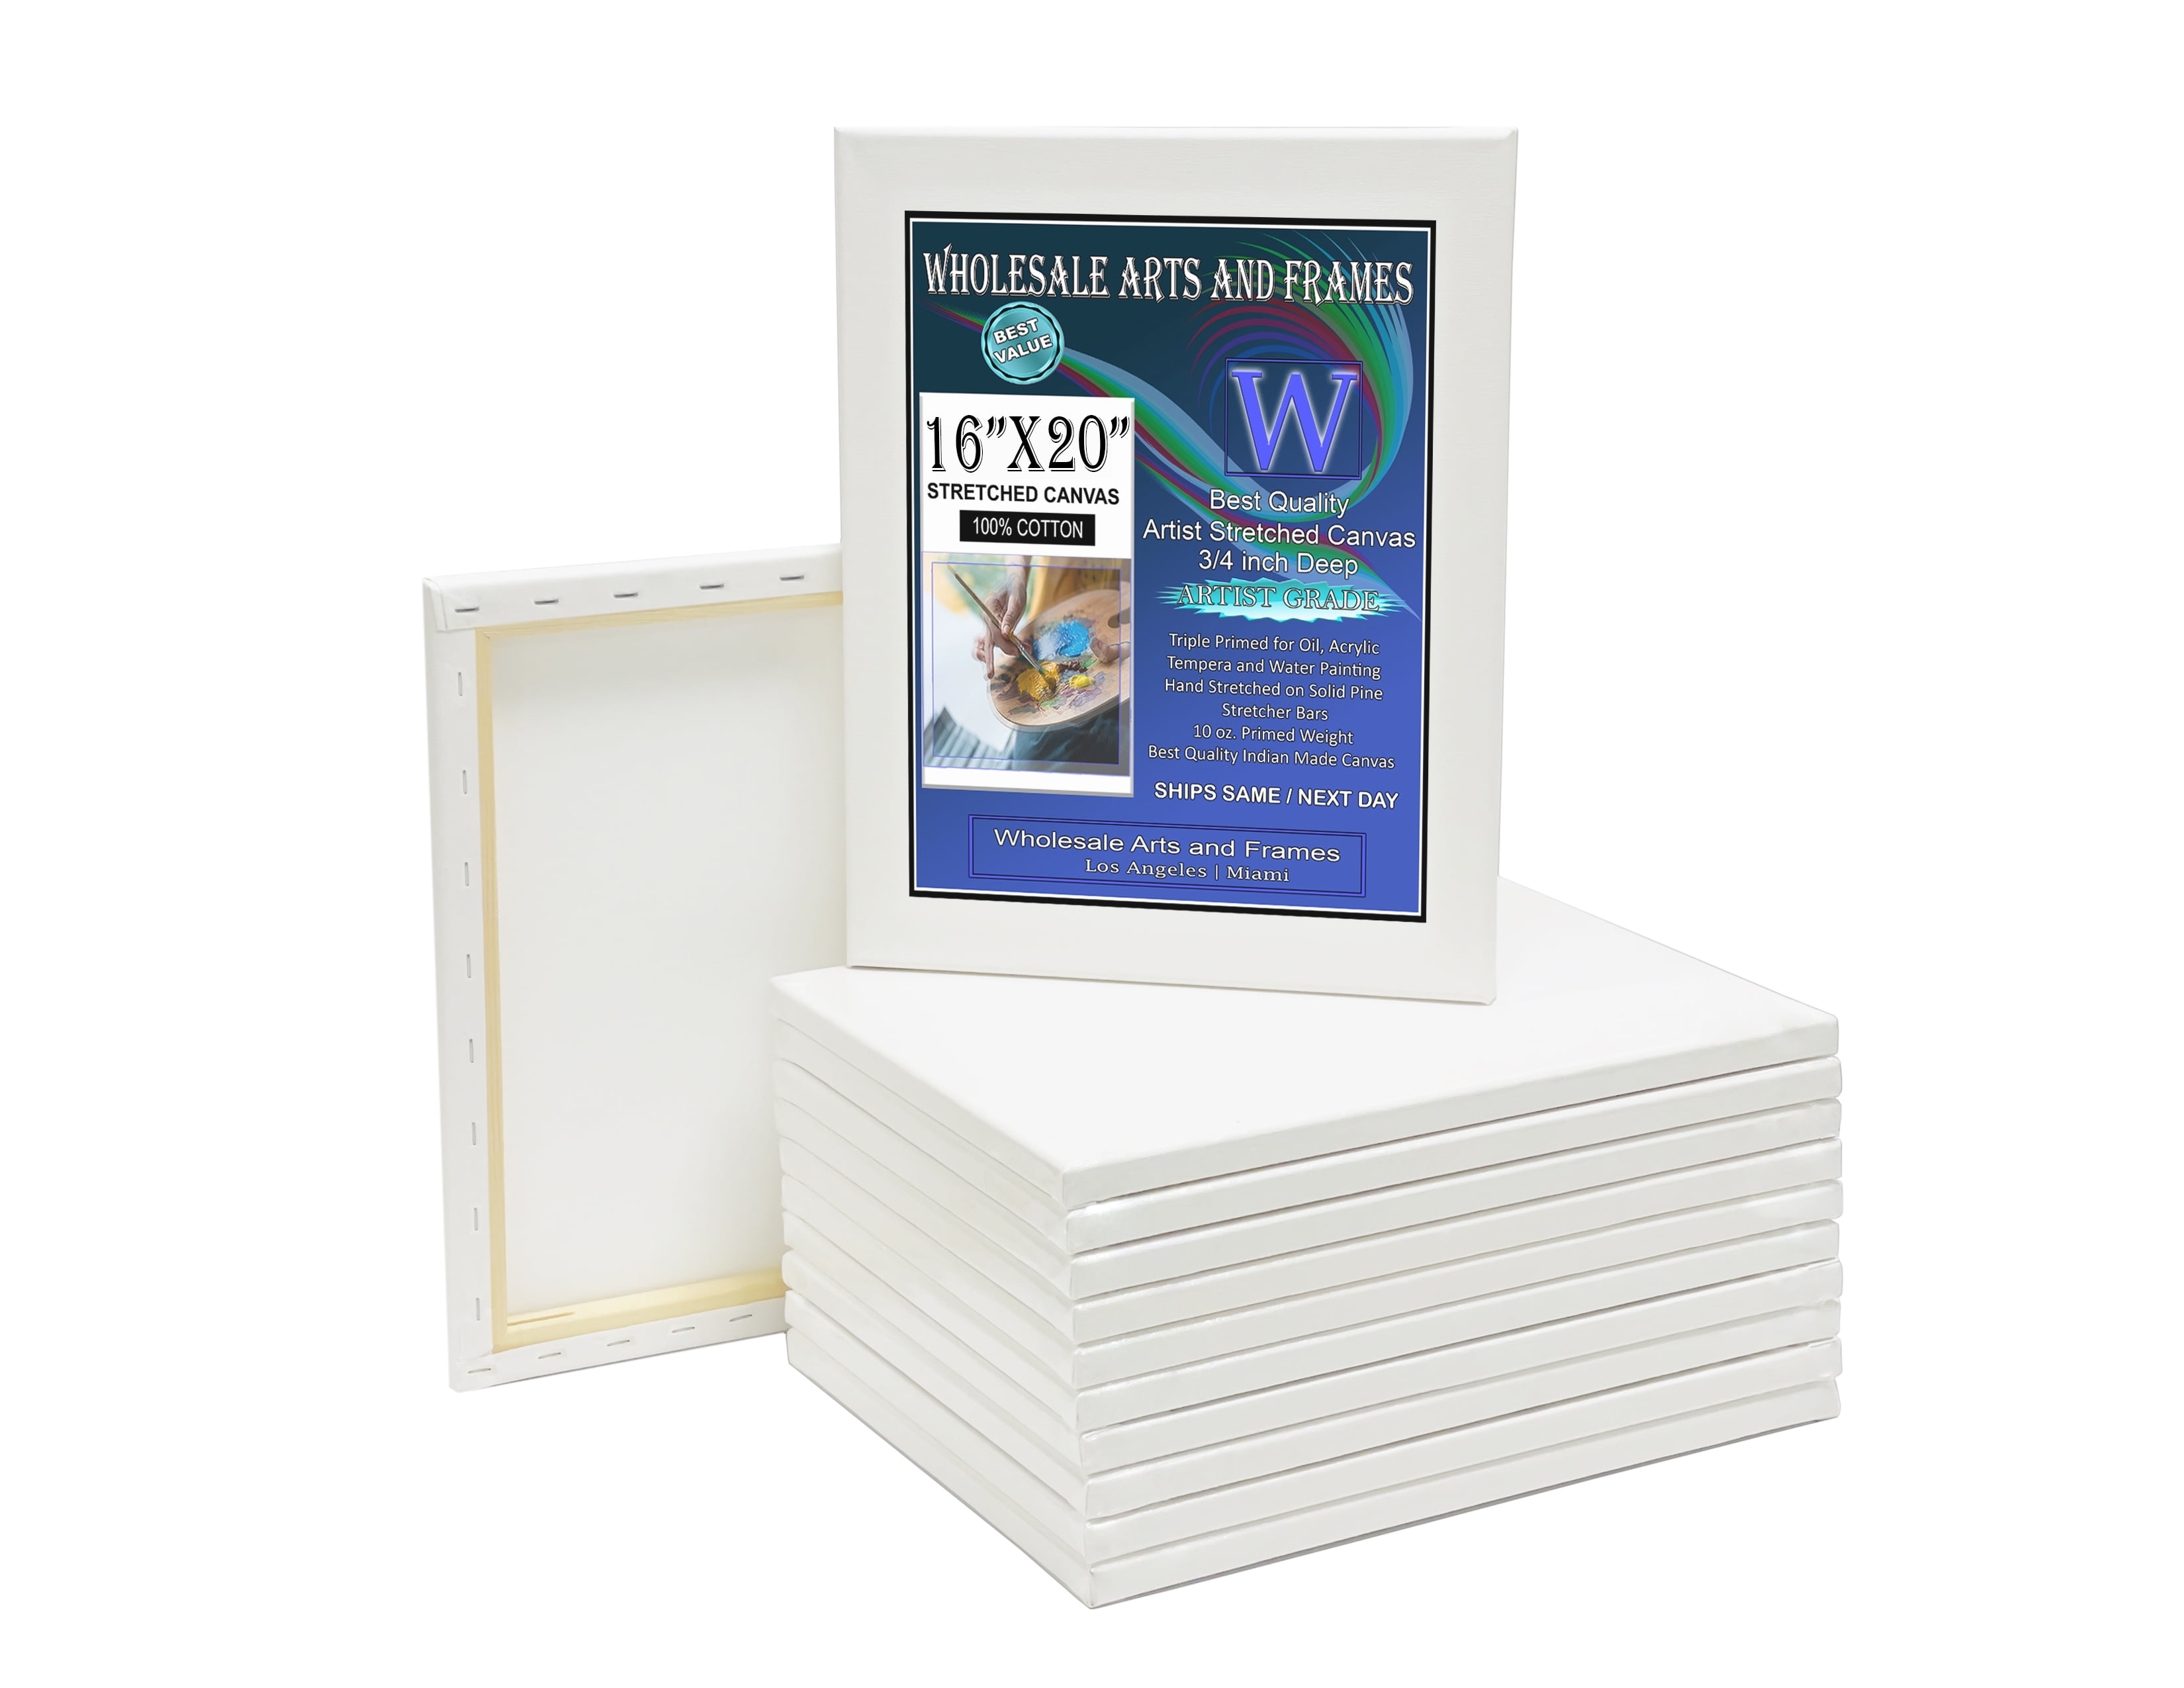 Stretched Canvas 20x30 10 Pack 10 oz. Triple Primed, Professional Artist  White Canvas, 100% Cotton, Art Supplies for Crafts, Gesso-Primed for Oil,  Acrylic & Pouring Art by WholesaleArtsFrames-com 